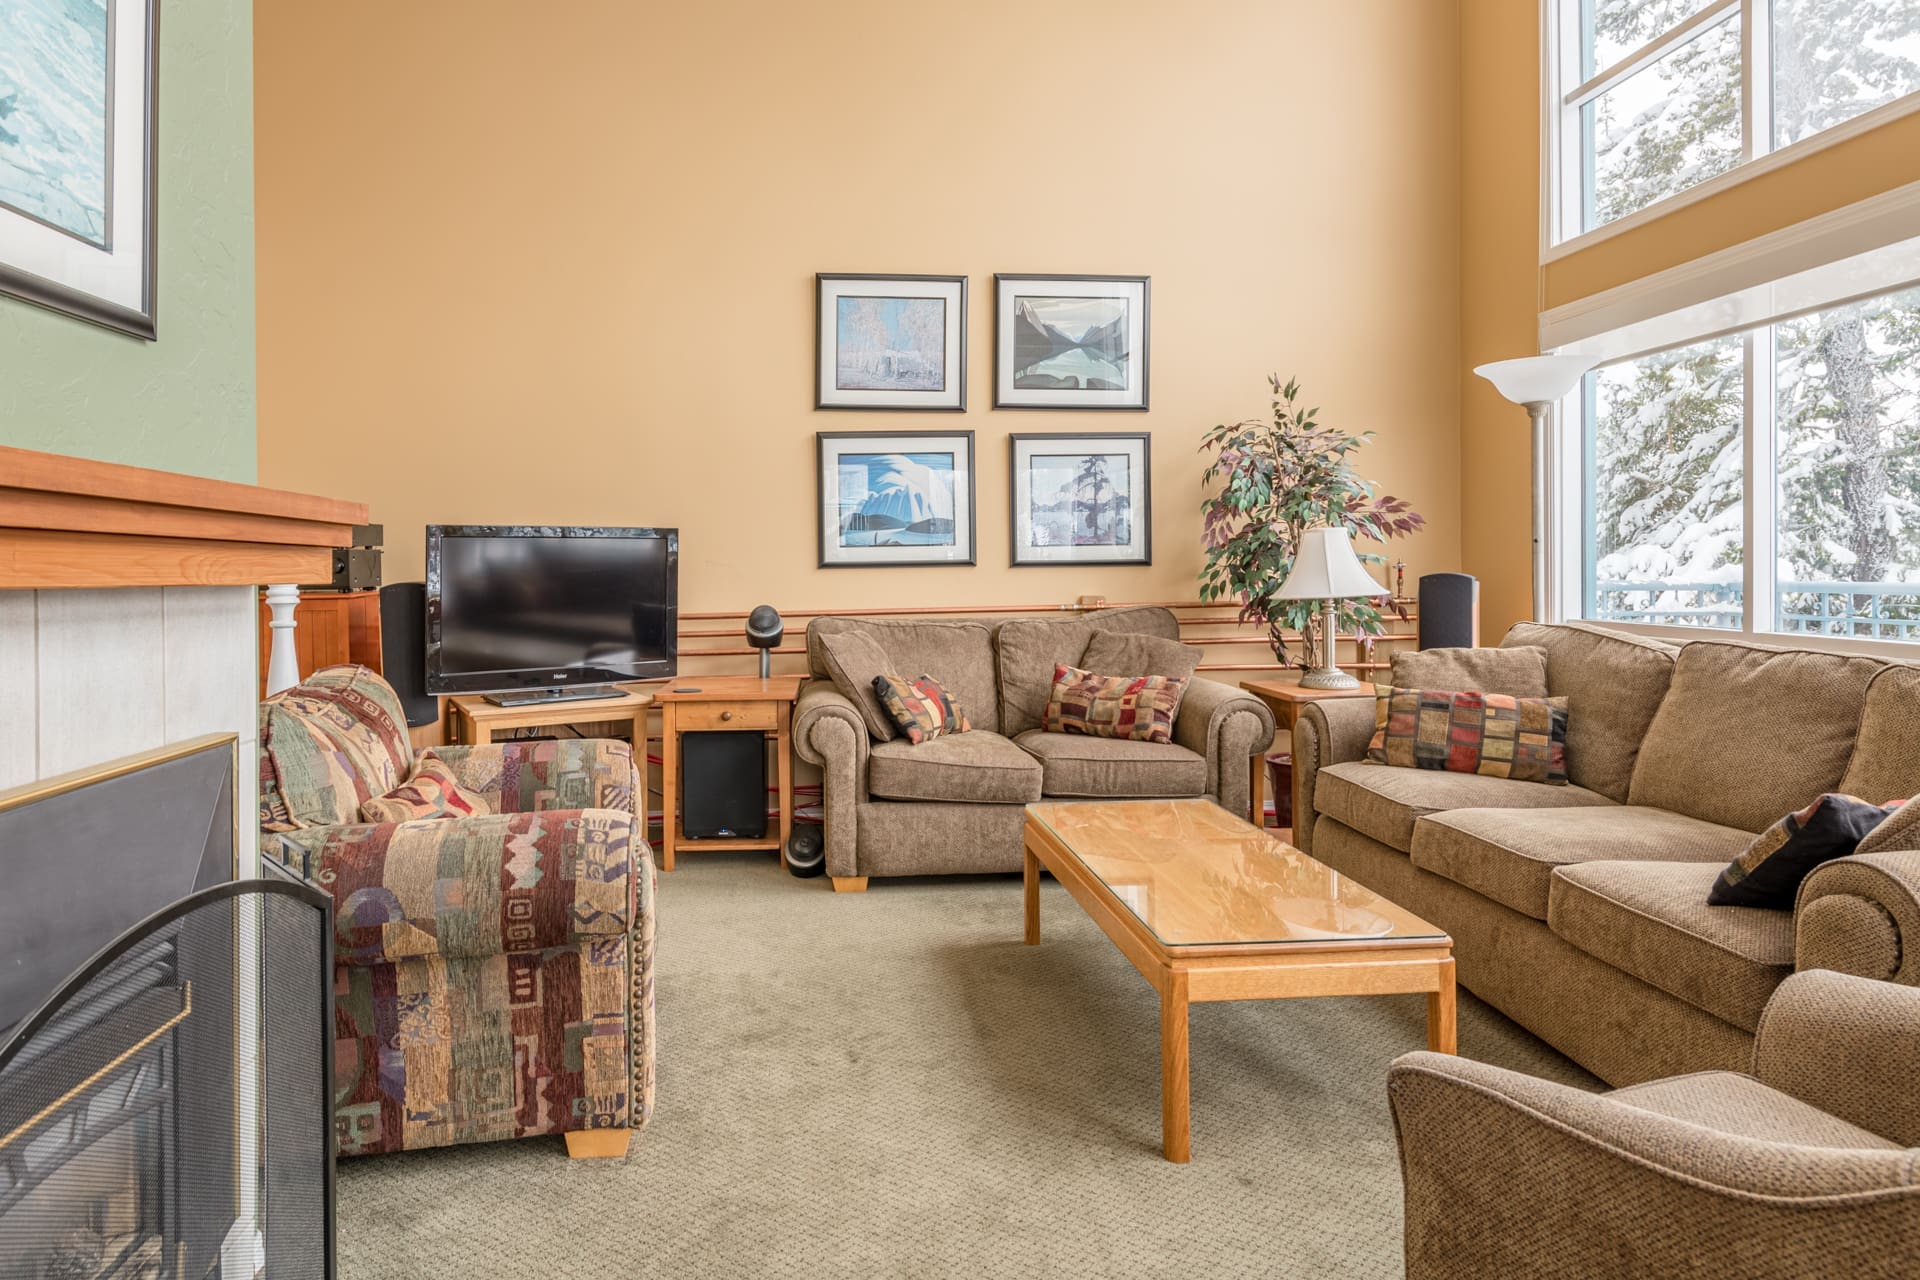 Upper Living Room with bright open windows and incredible views. Gas fireplace, private hot tub, laundry, garage for storage, and the skiway is right outside the back of the home to whisk you to the village in moments. Pet-friendly too!